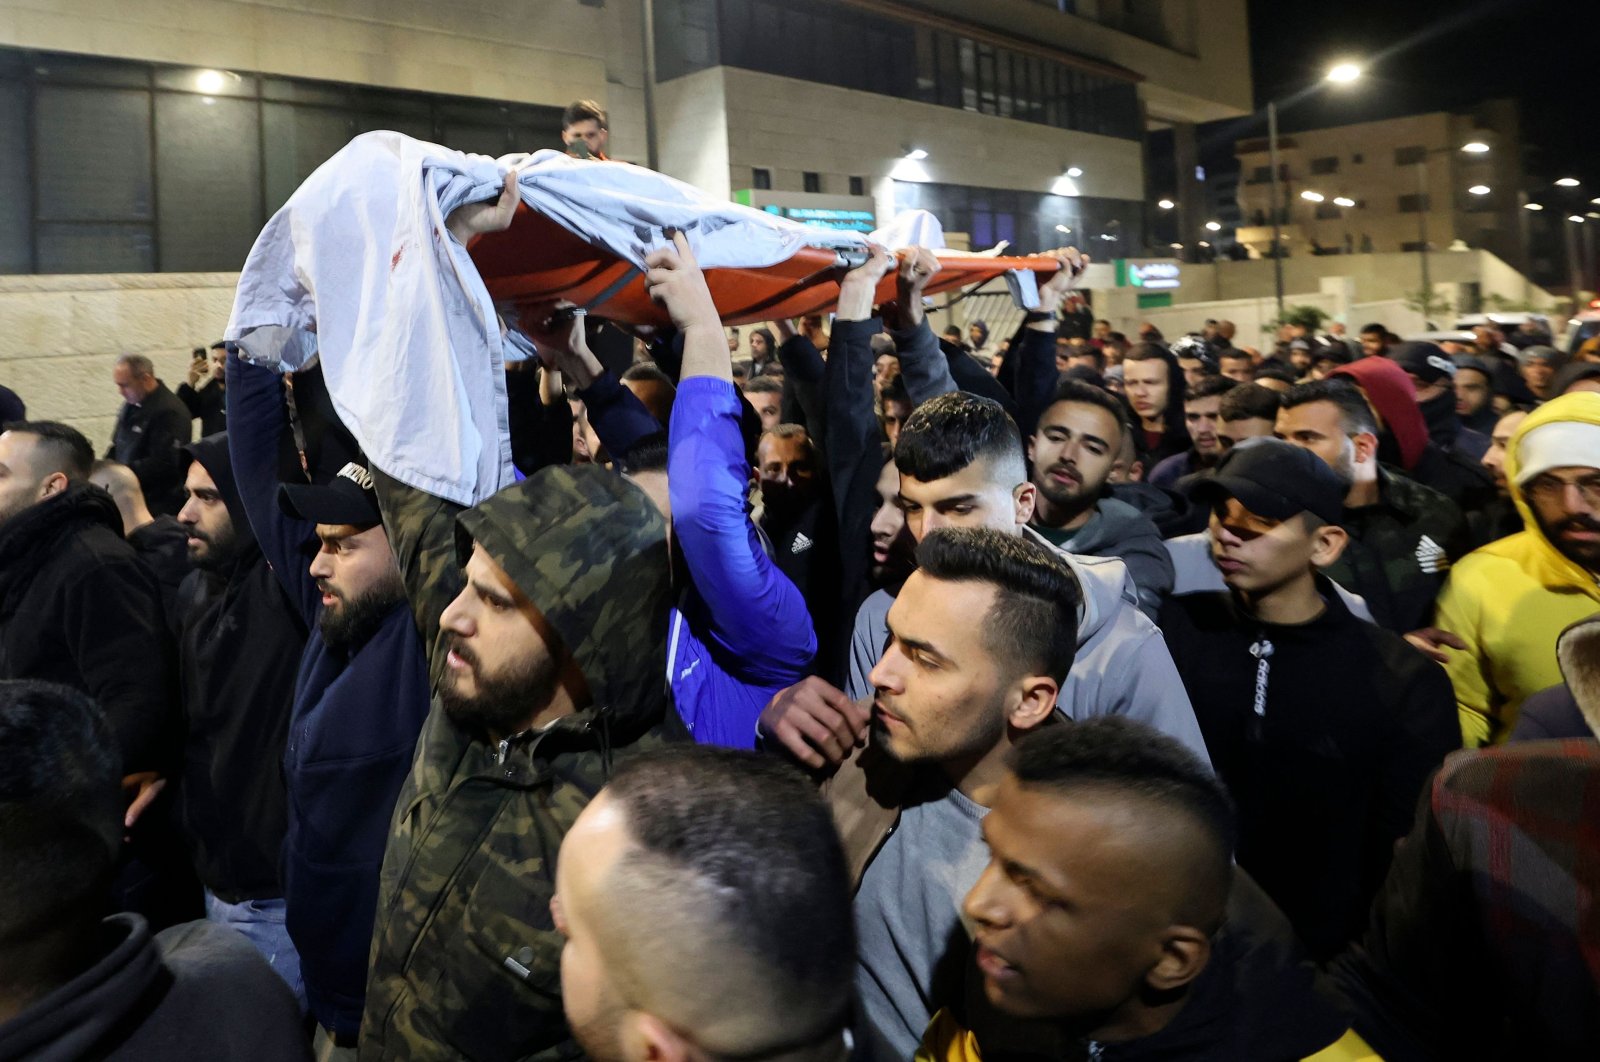 Palestinians carry the body of Mohammed Abu Salah, 17, after he was killed by Israeli forces during clashes near Jenin in the occupied West Bank, Palestine, Feb. 14, 2022. (AFP Photo)